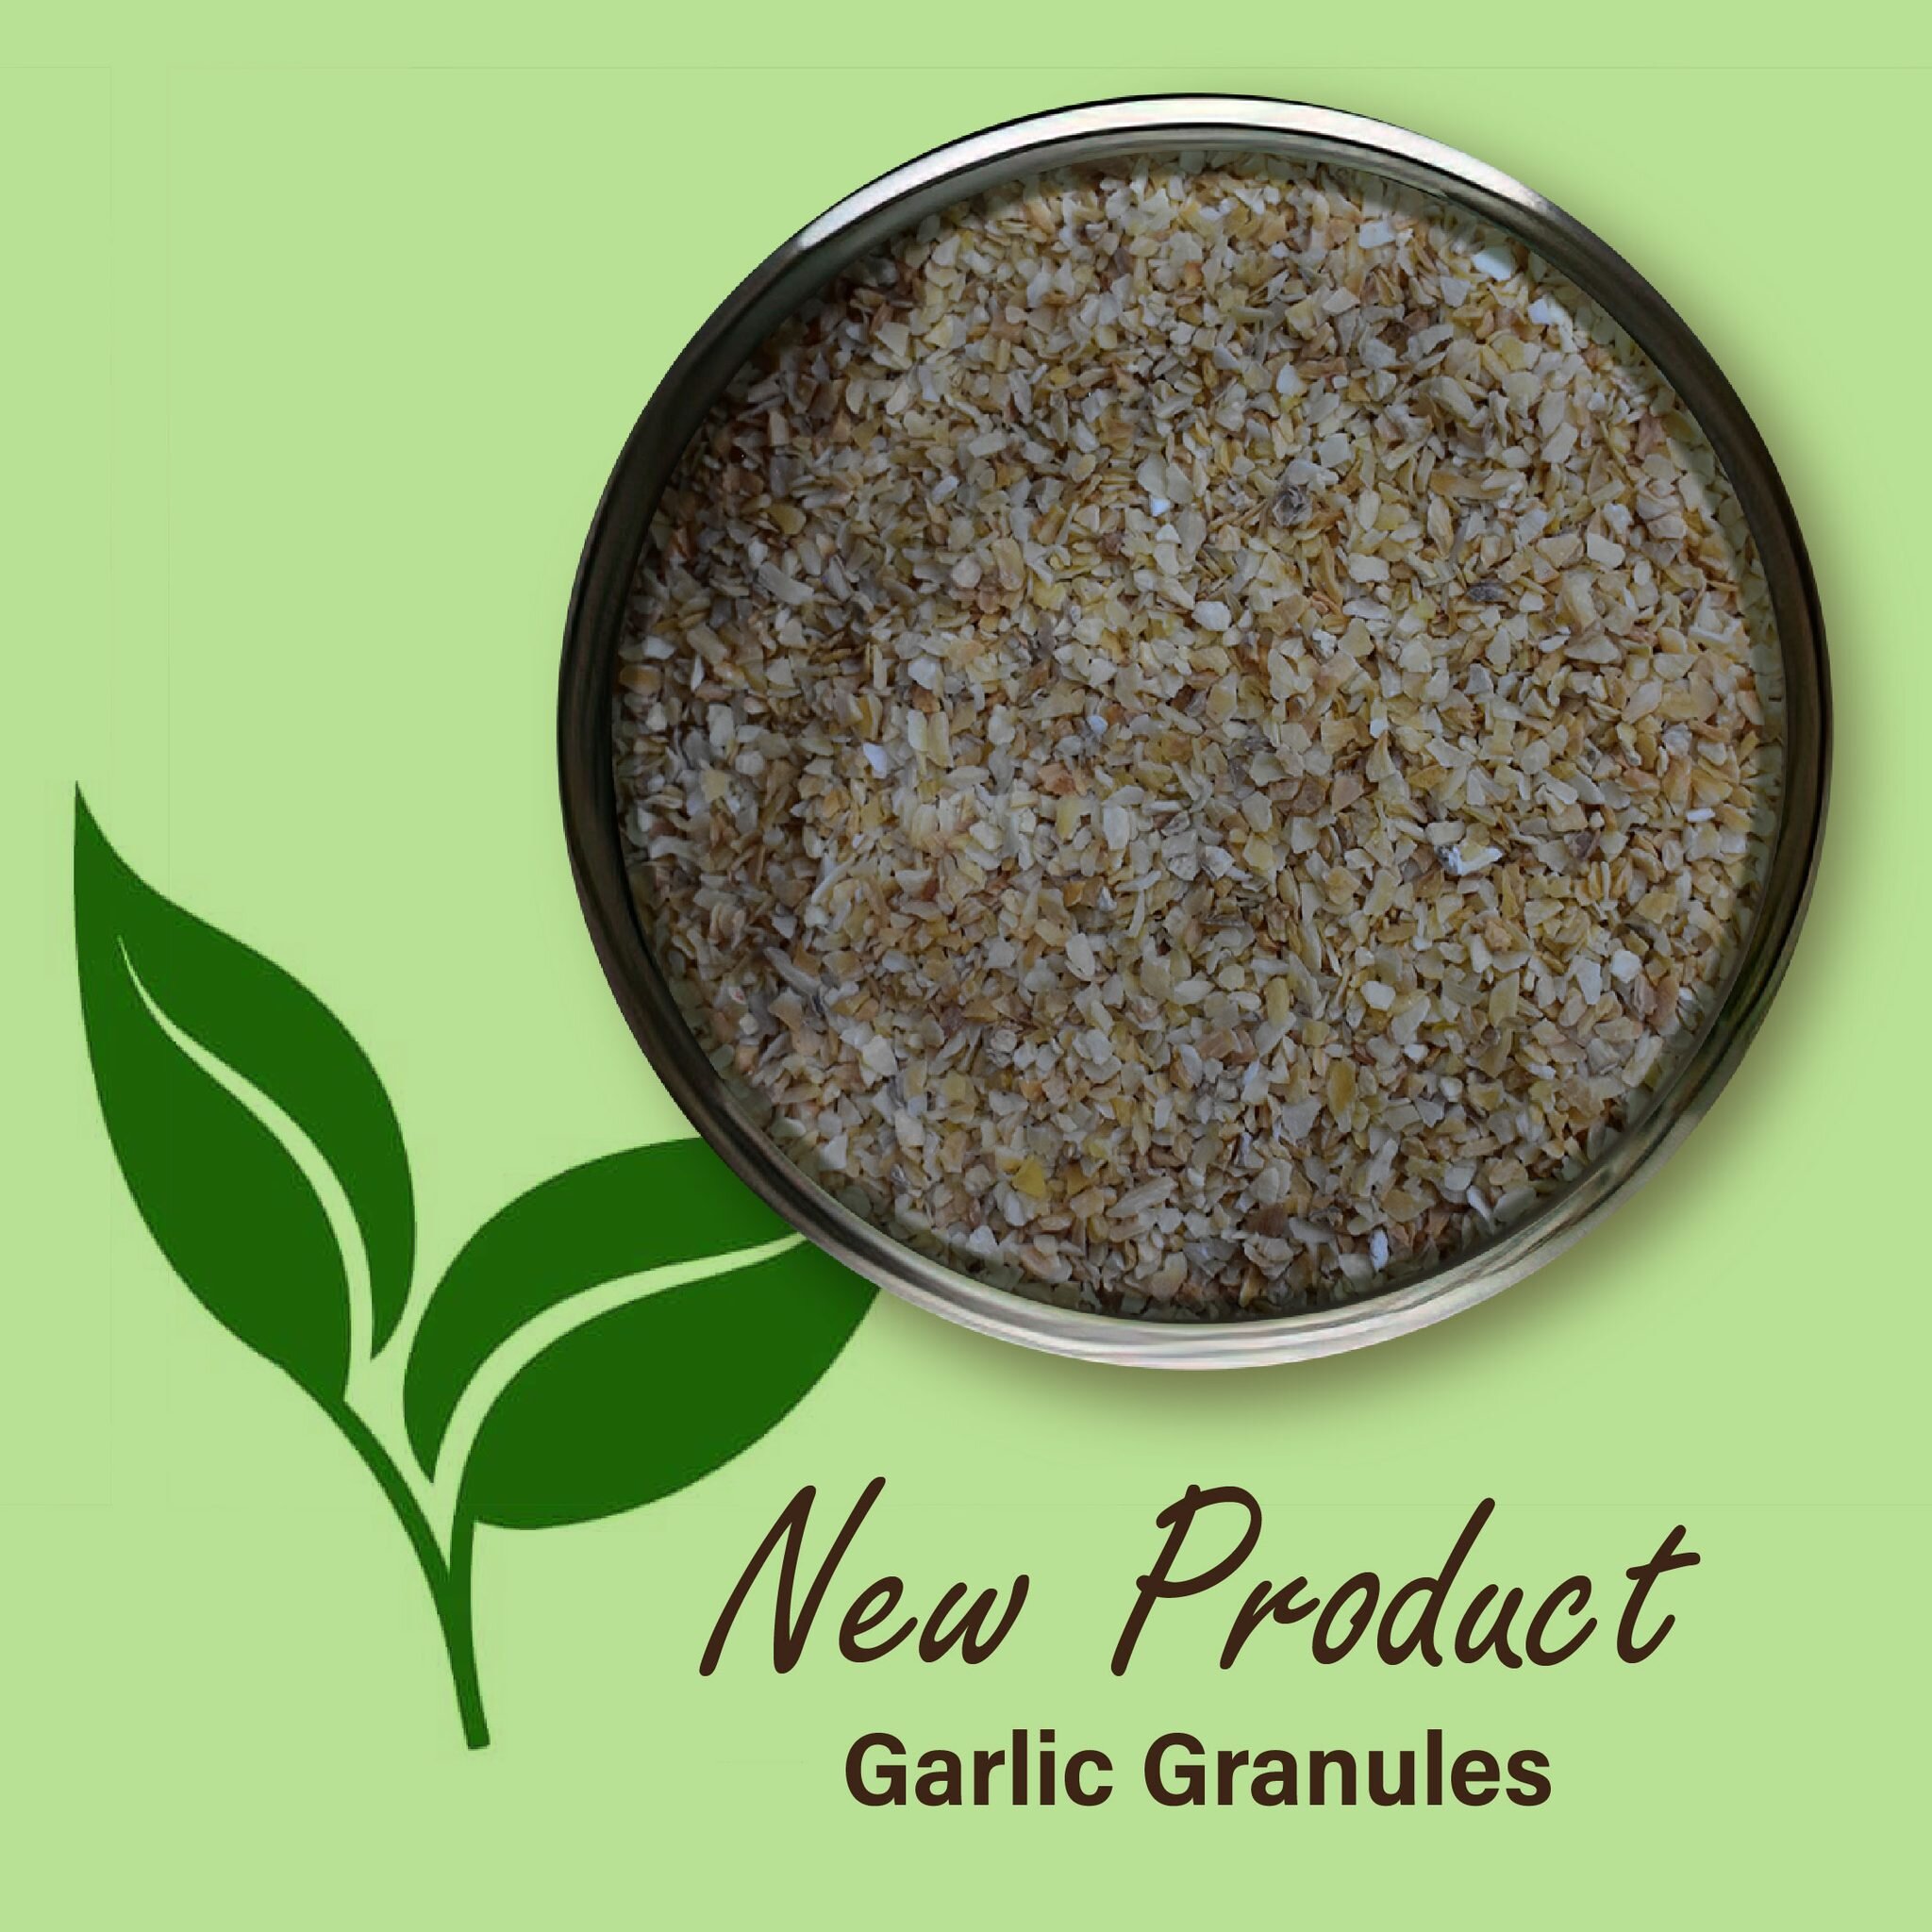 Introducing our latest addition, Garlic Granules. Enhance your dishes with this flavorful twist. Available now at the Hub Bulk &amp; Bare #newproduct #garlicgranules